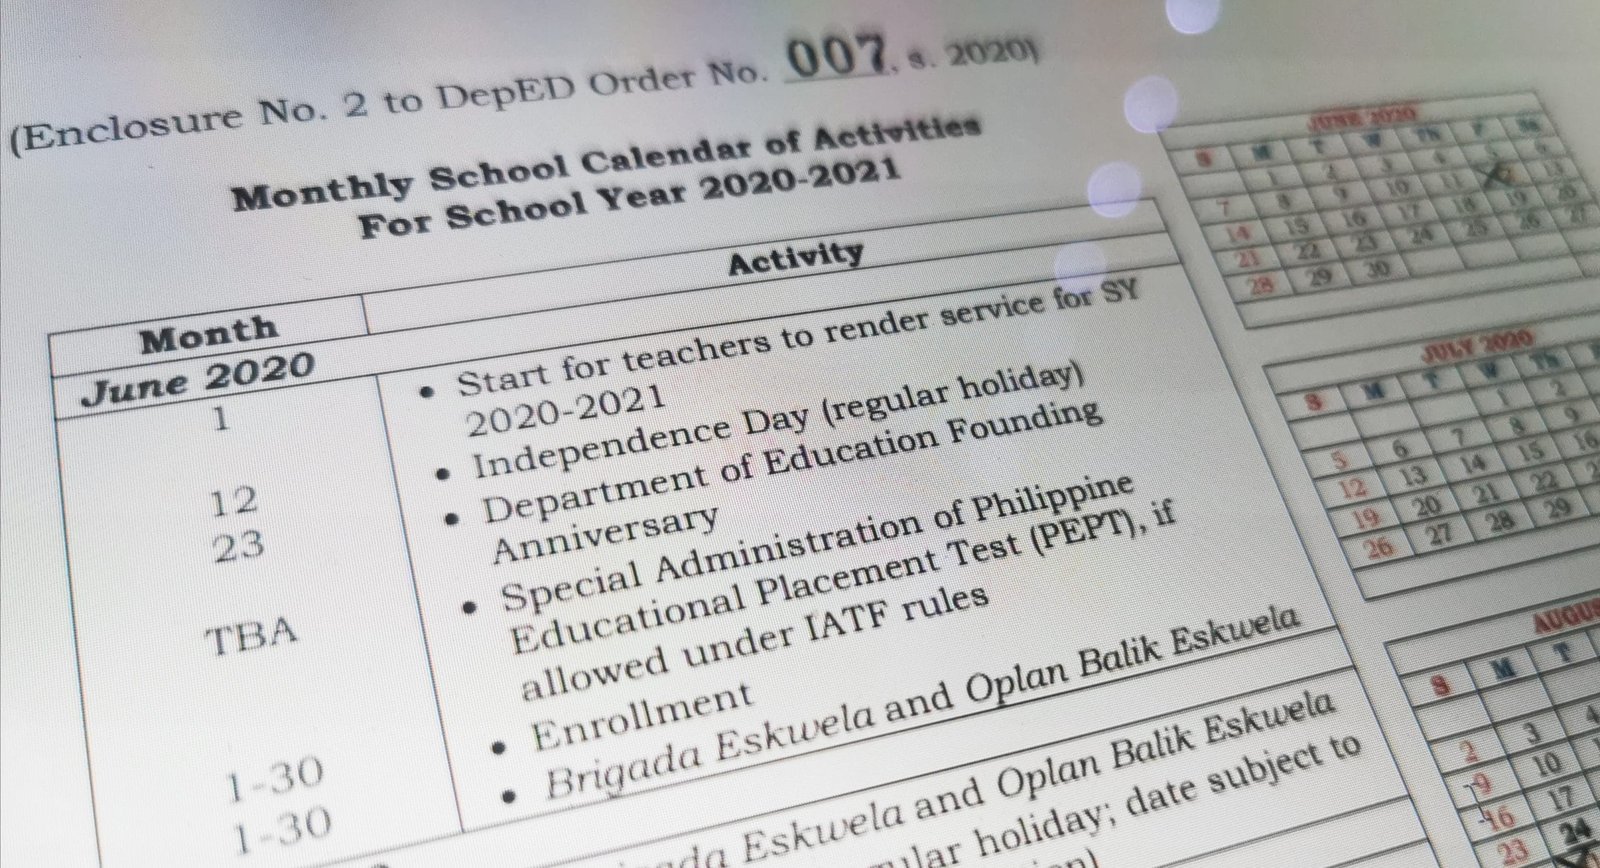 Deped School Calendar And Activities For Sy 2020 2021 Images and